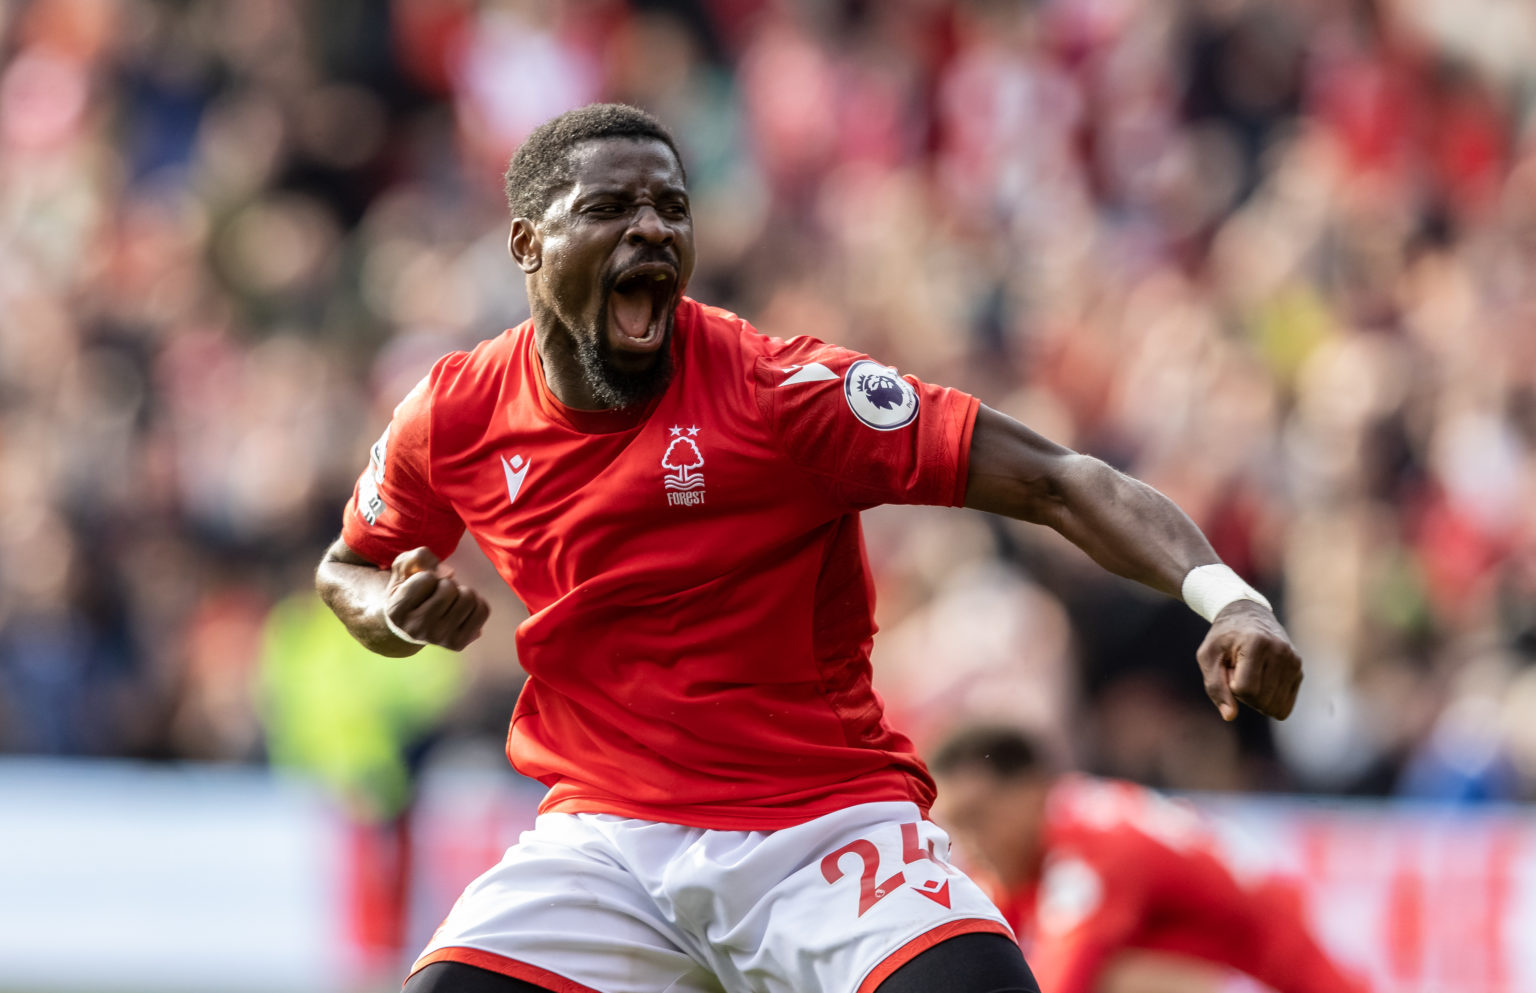 NOTTINGHAM, ENGLAND - OCTOBER 22: Nottingham Forest's Serge Aurier celebrates victory at the end of the match during the Premier League match between Nottingham Forest and Liverpool FC at City Ground on October 22, 2022 in Nottingham, United Kingdom. (Photo by Andrew Kearns - CameraSport via Getty Images)